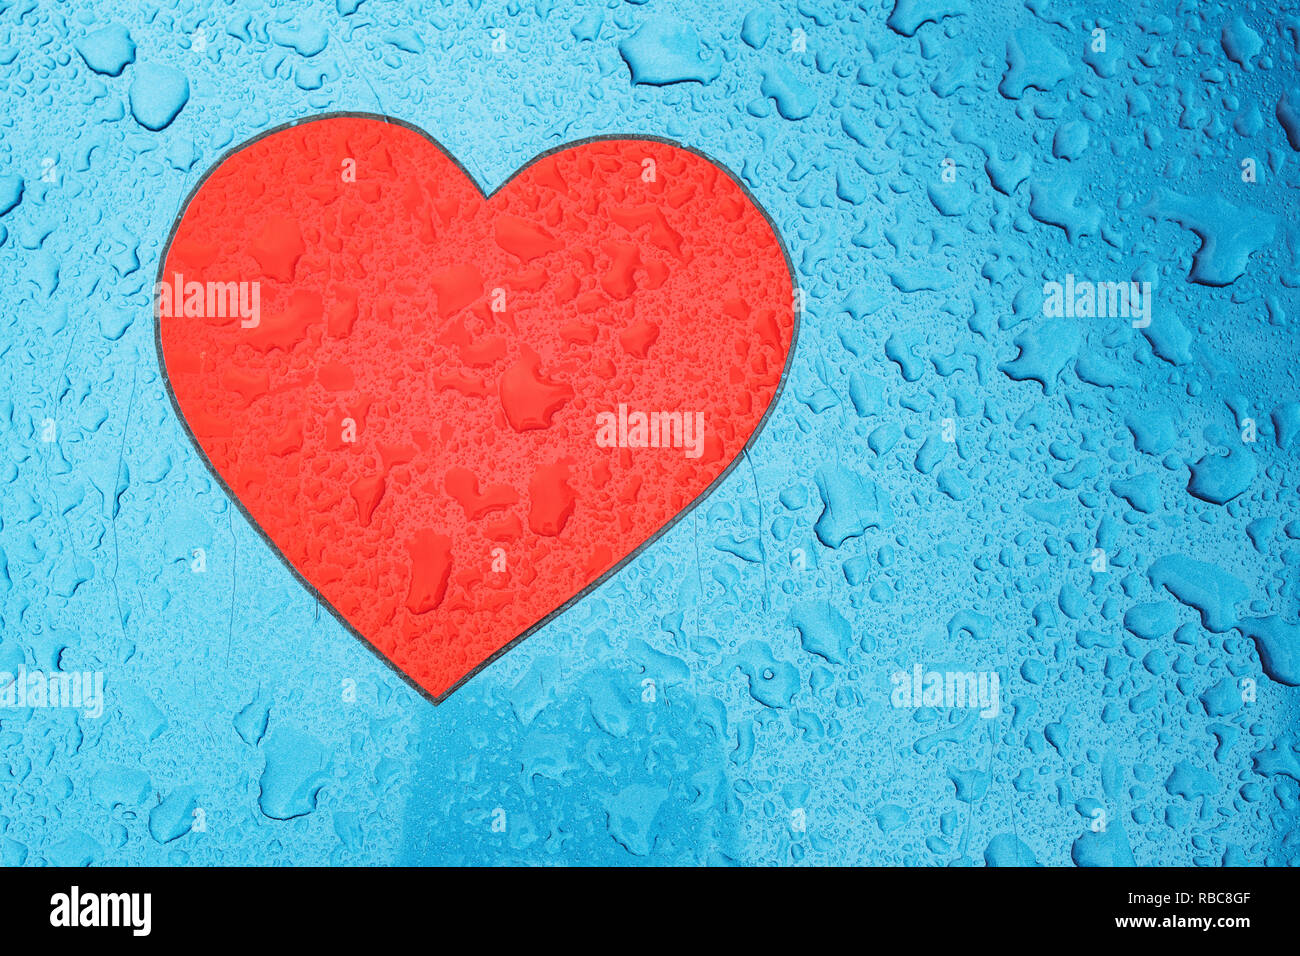 Heart shape symbol and raindrops on metal surface, love and romance concept Stock Photo